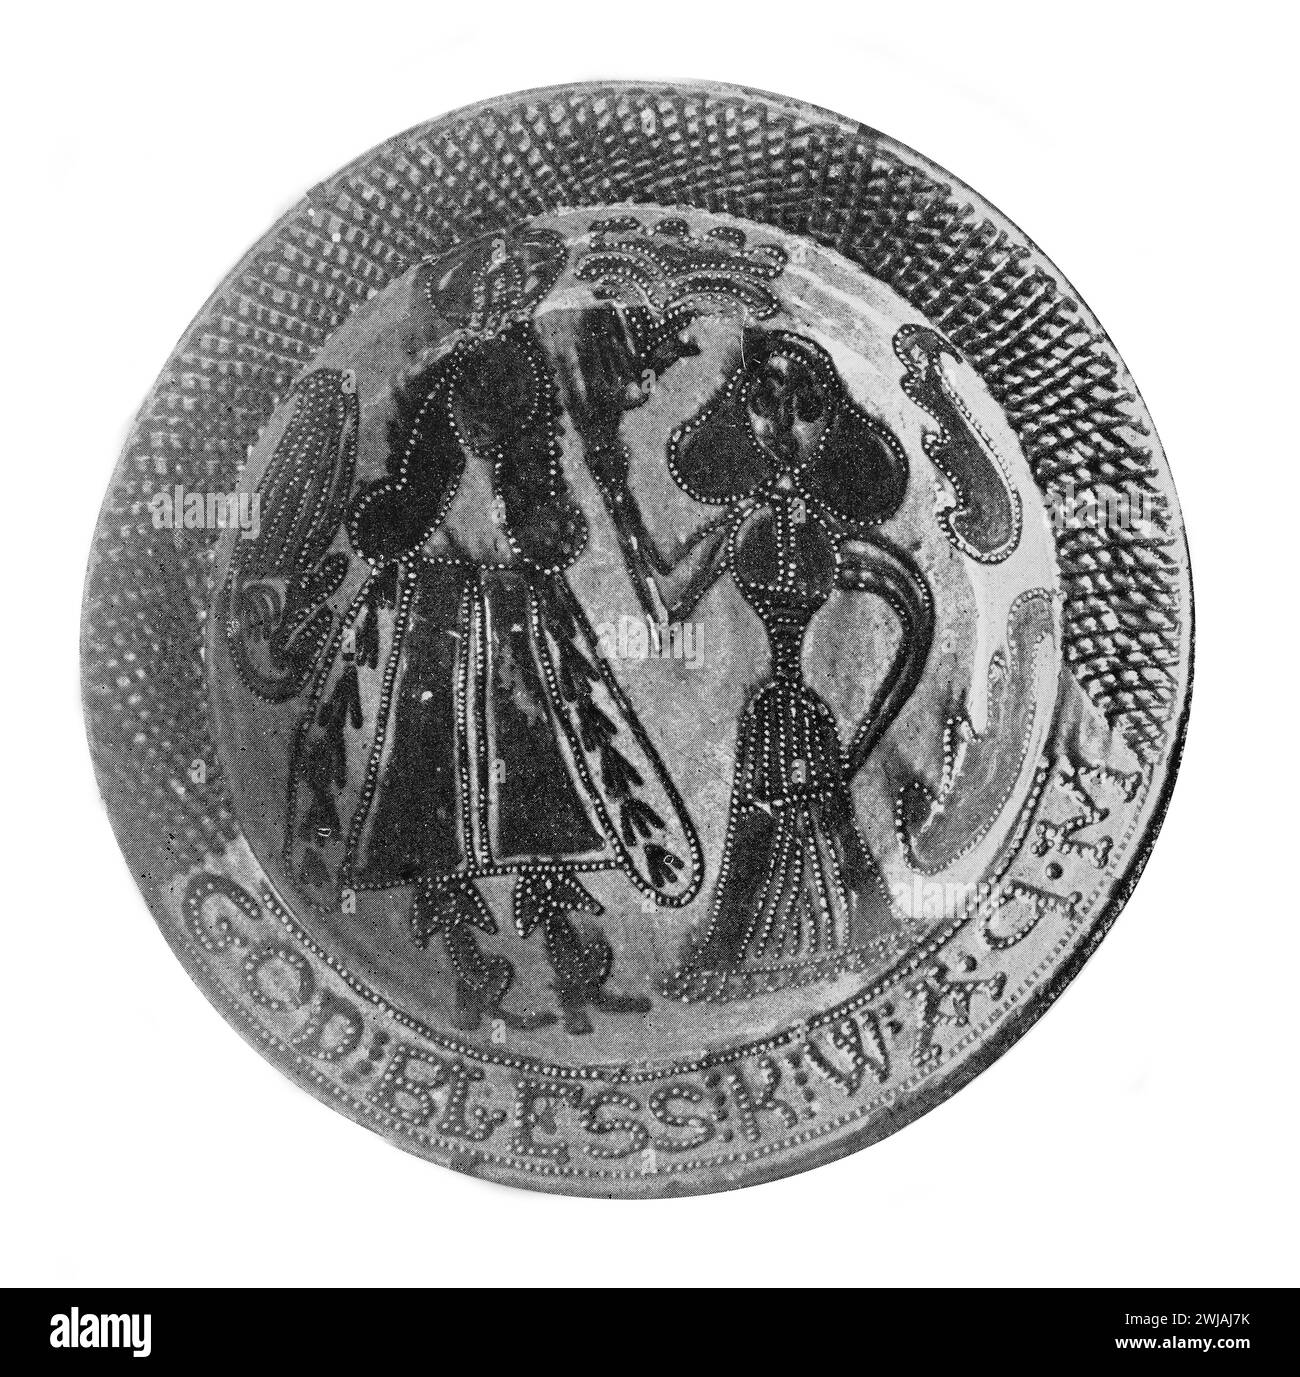 17th century Toft Ware plate depicting King William (William III of England) and Queen Mary. Black and White Illustration from the Connoisseur, an Illustrated Magazine for Collectors Voll 3 (May-Aug 1902) published in London. Stock Photo